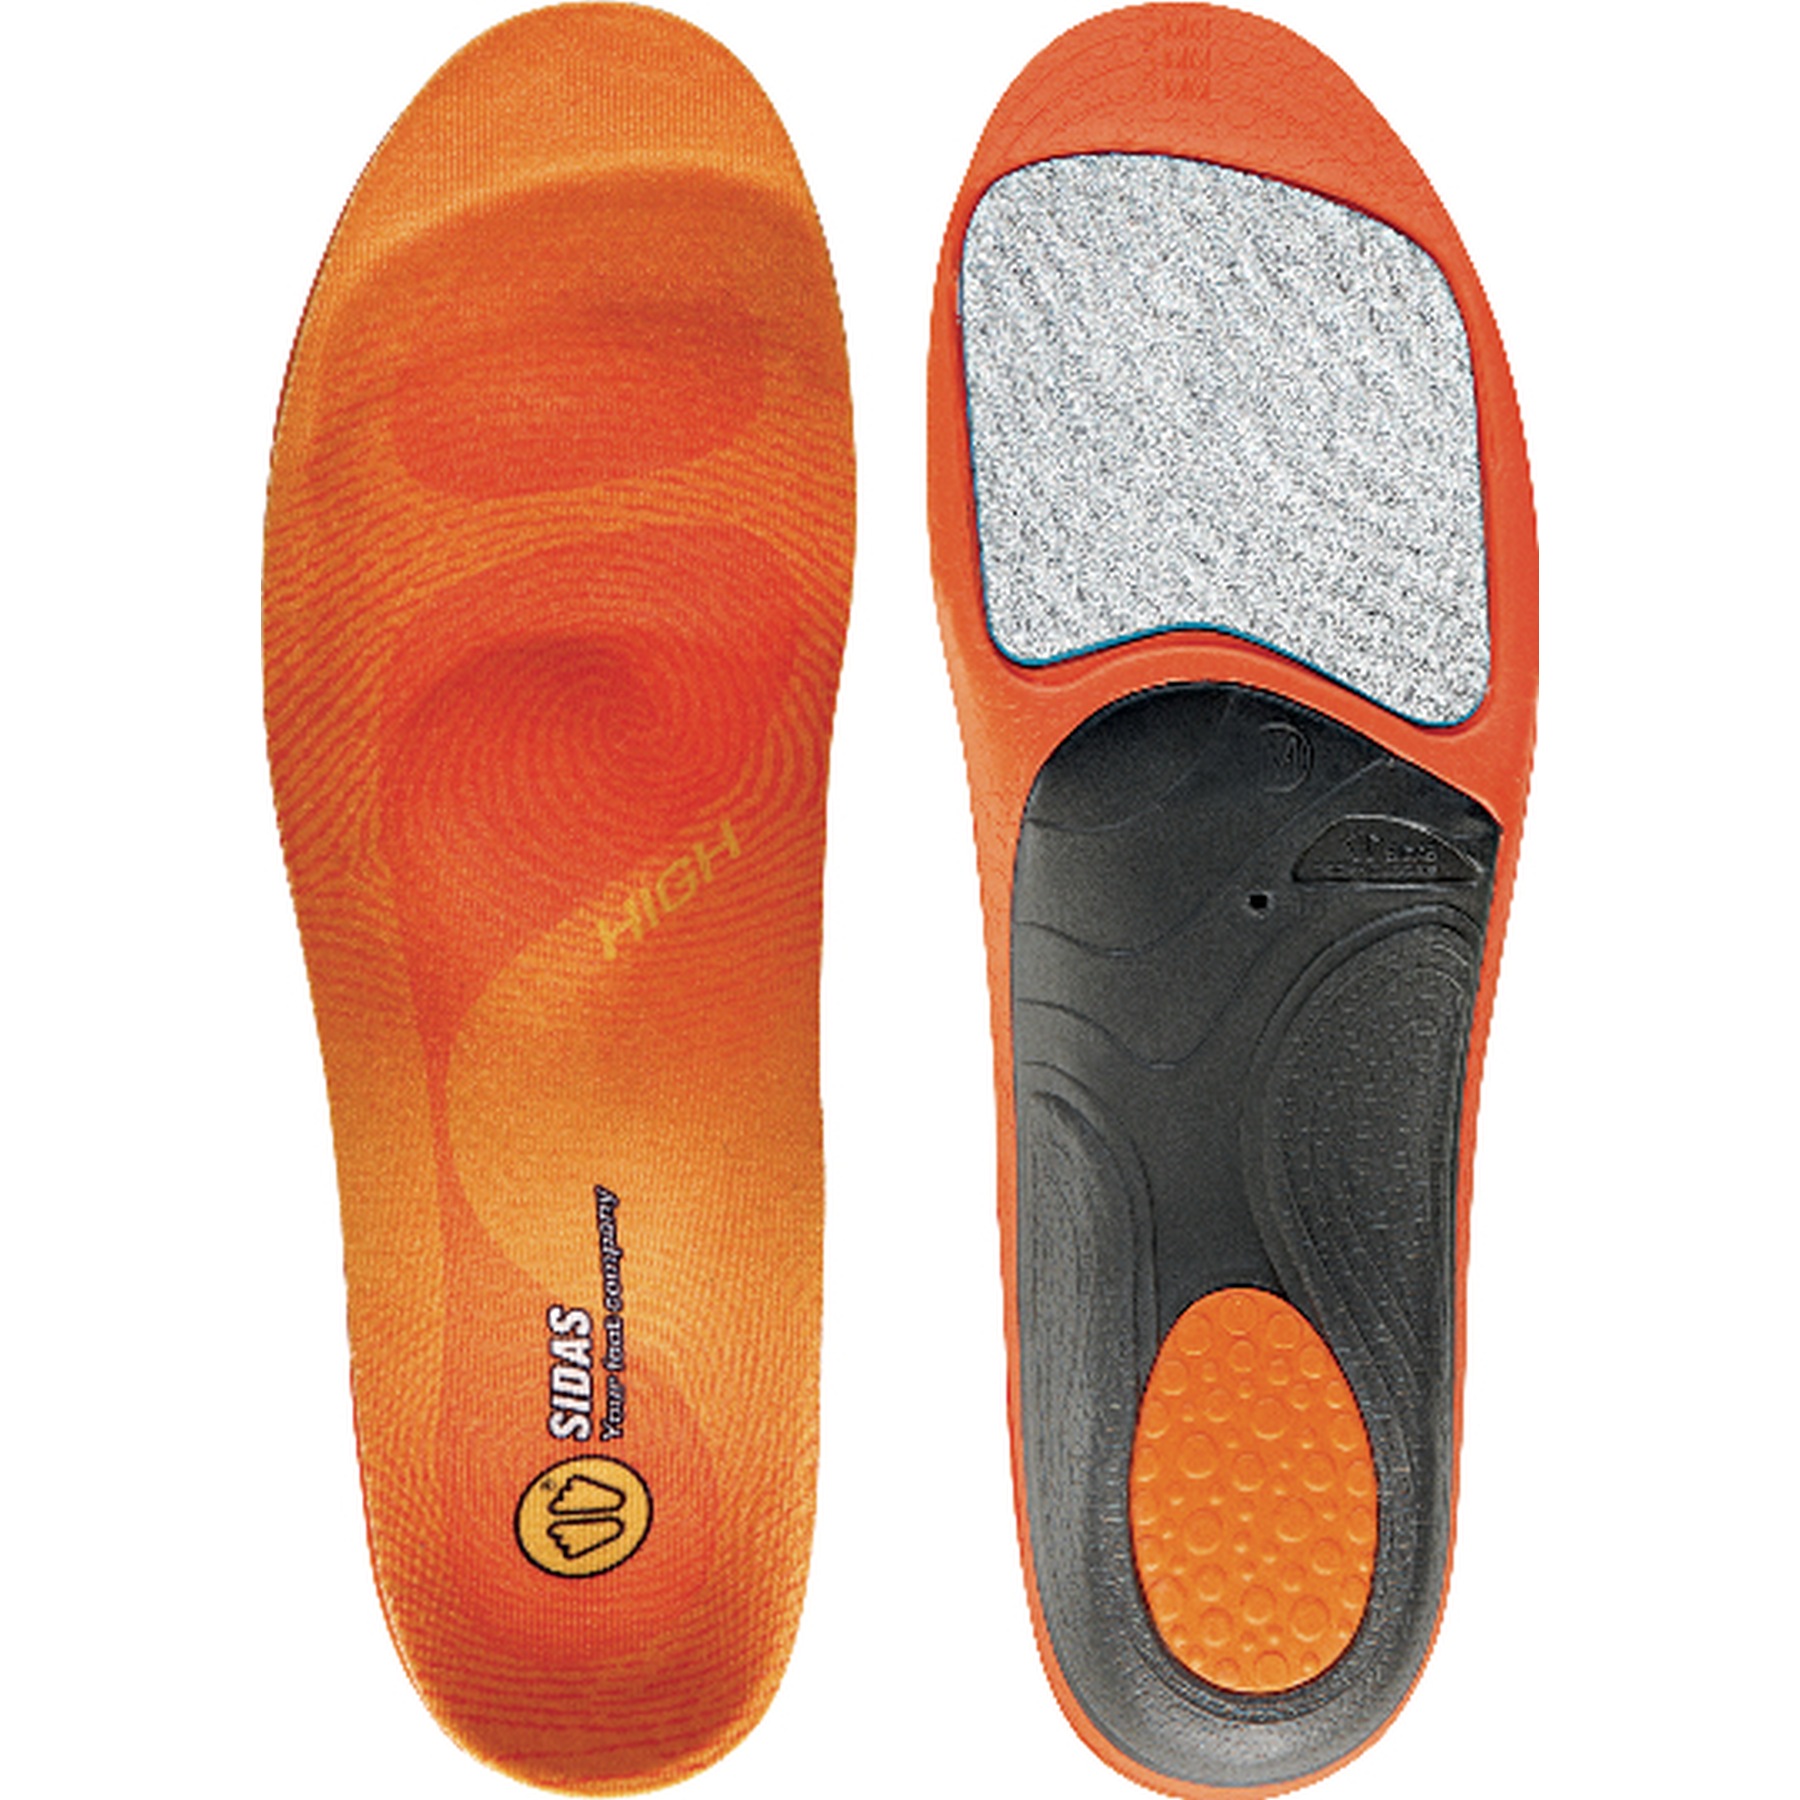 Picture of Sidas Winter 3Feet high Insole